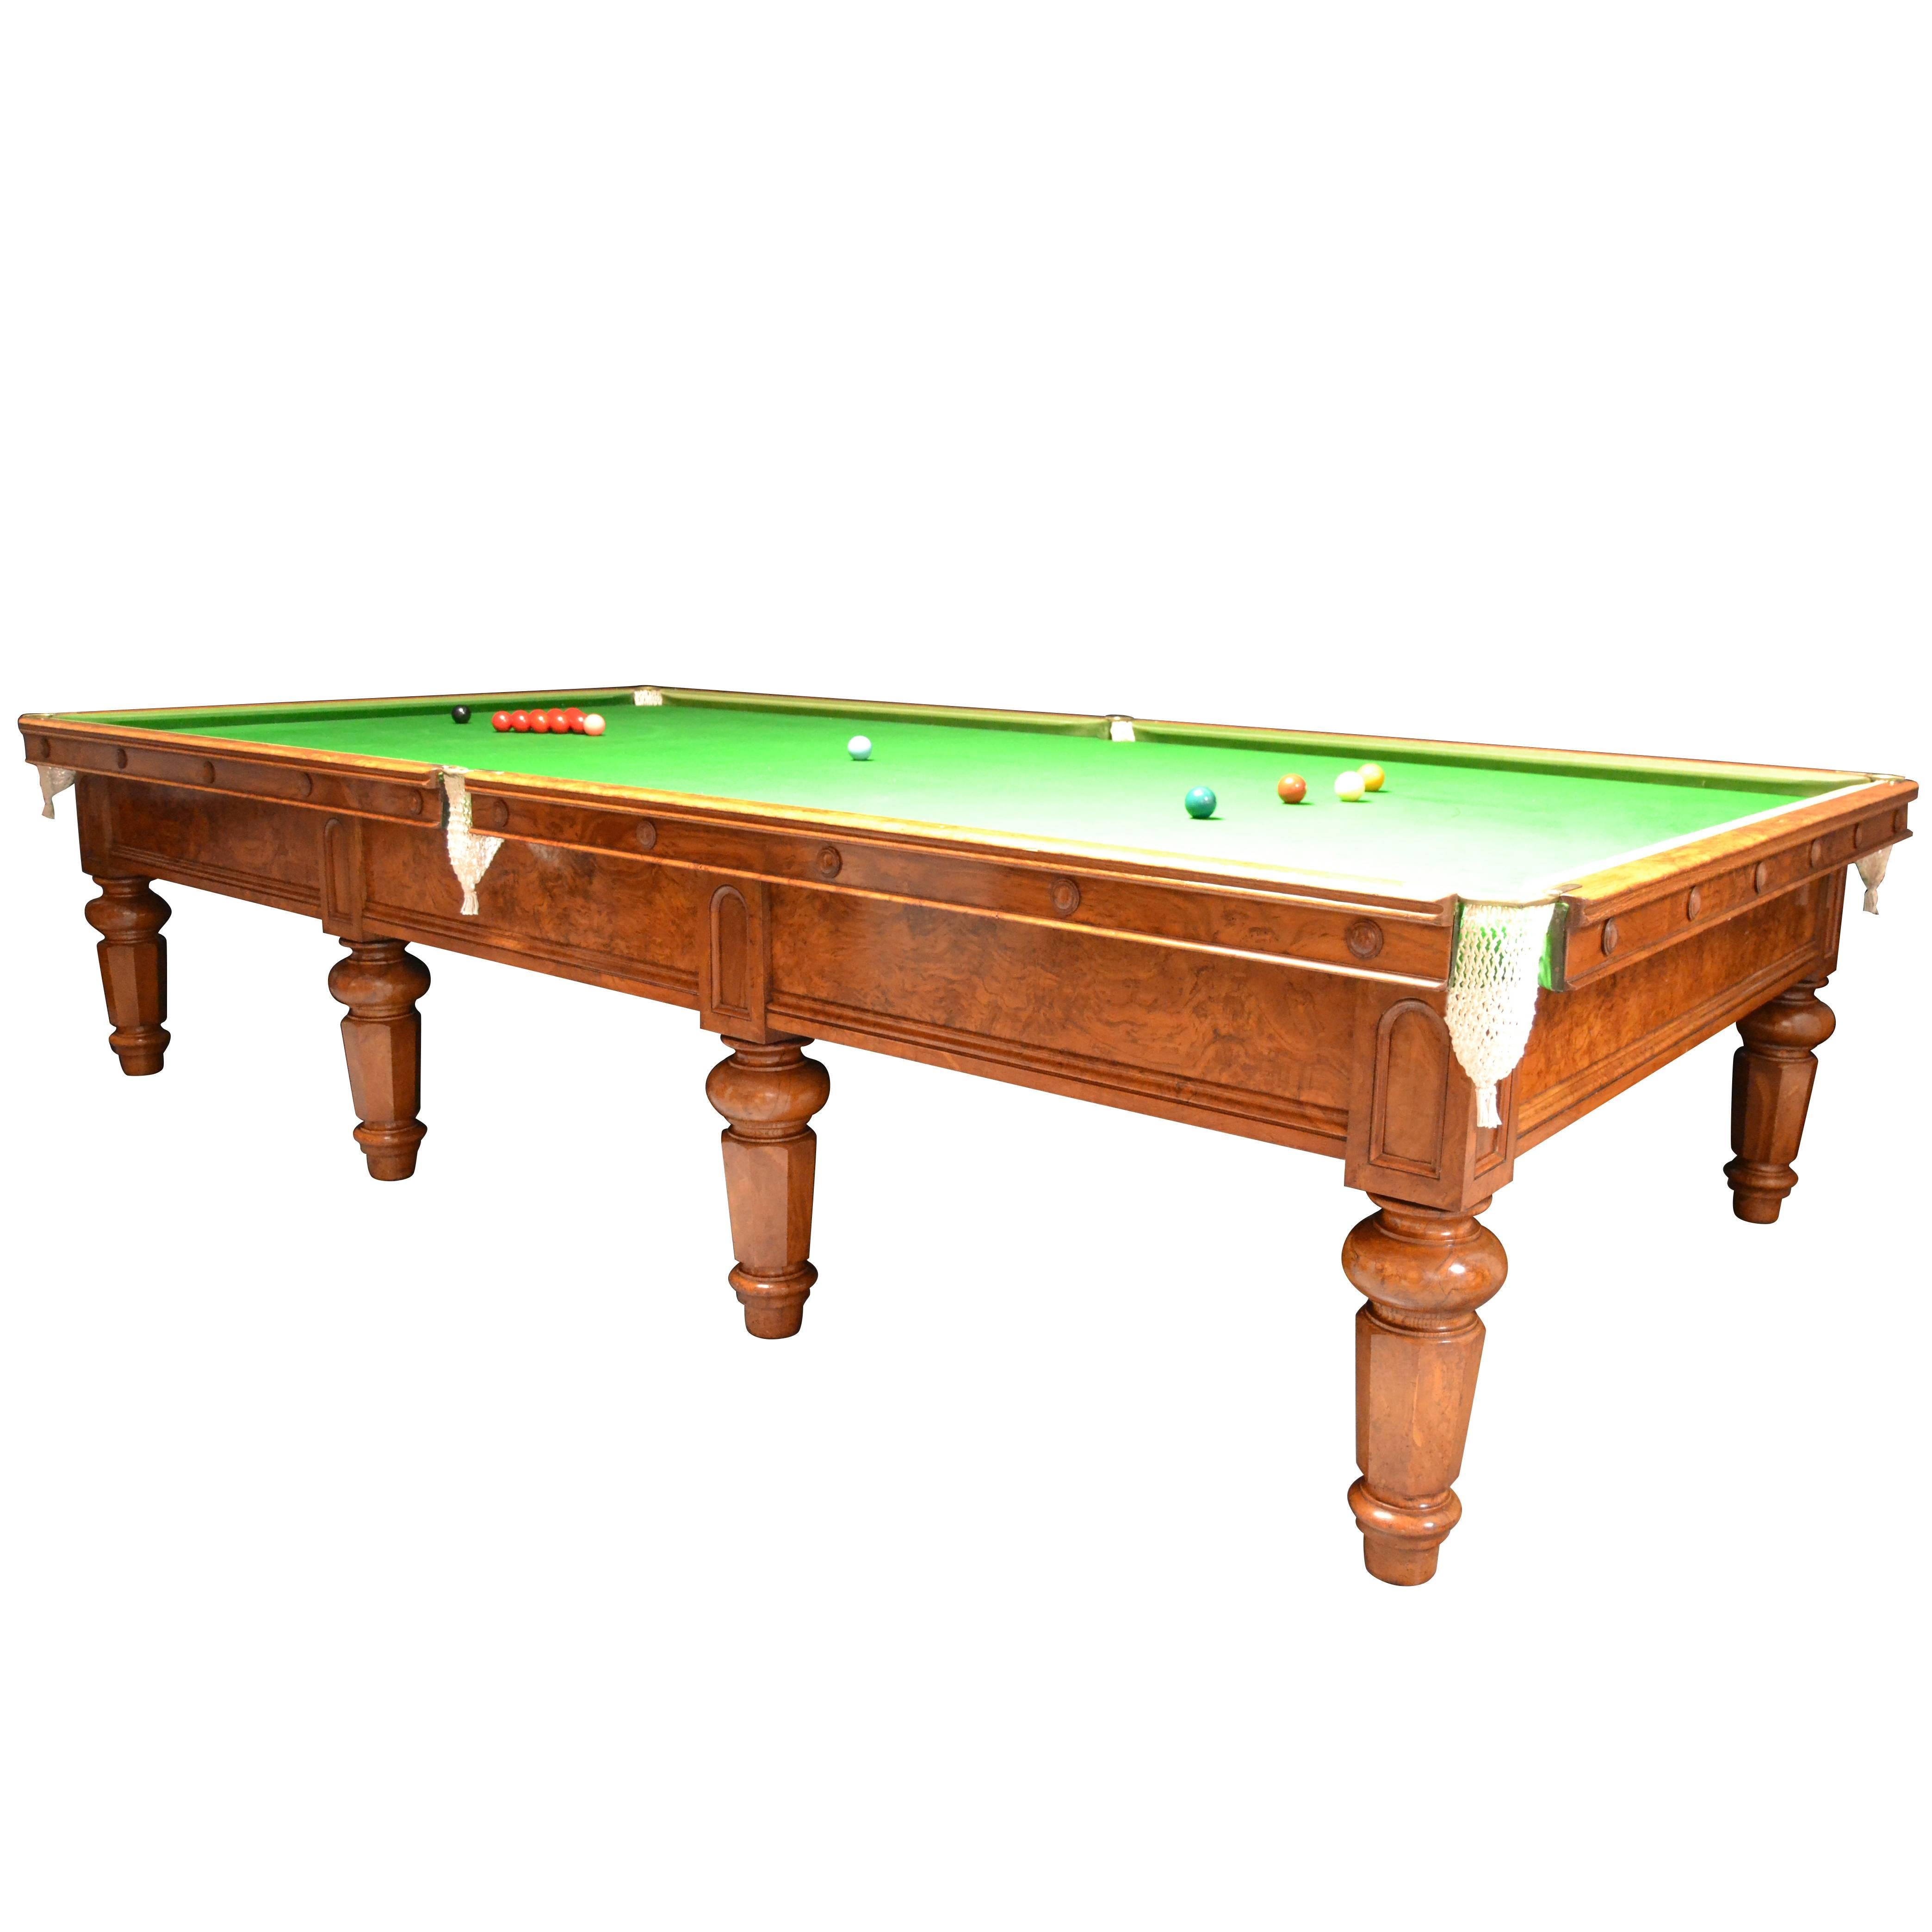 Billiard, Snooker Table Made for the 5th Earl of Hardwicke